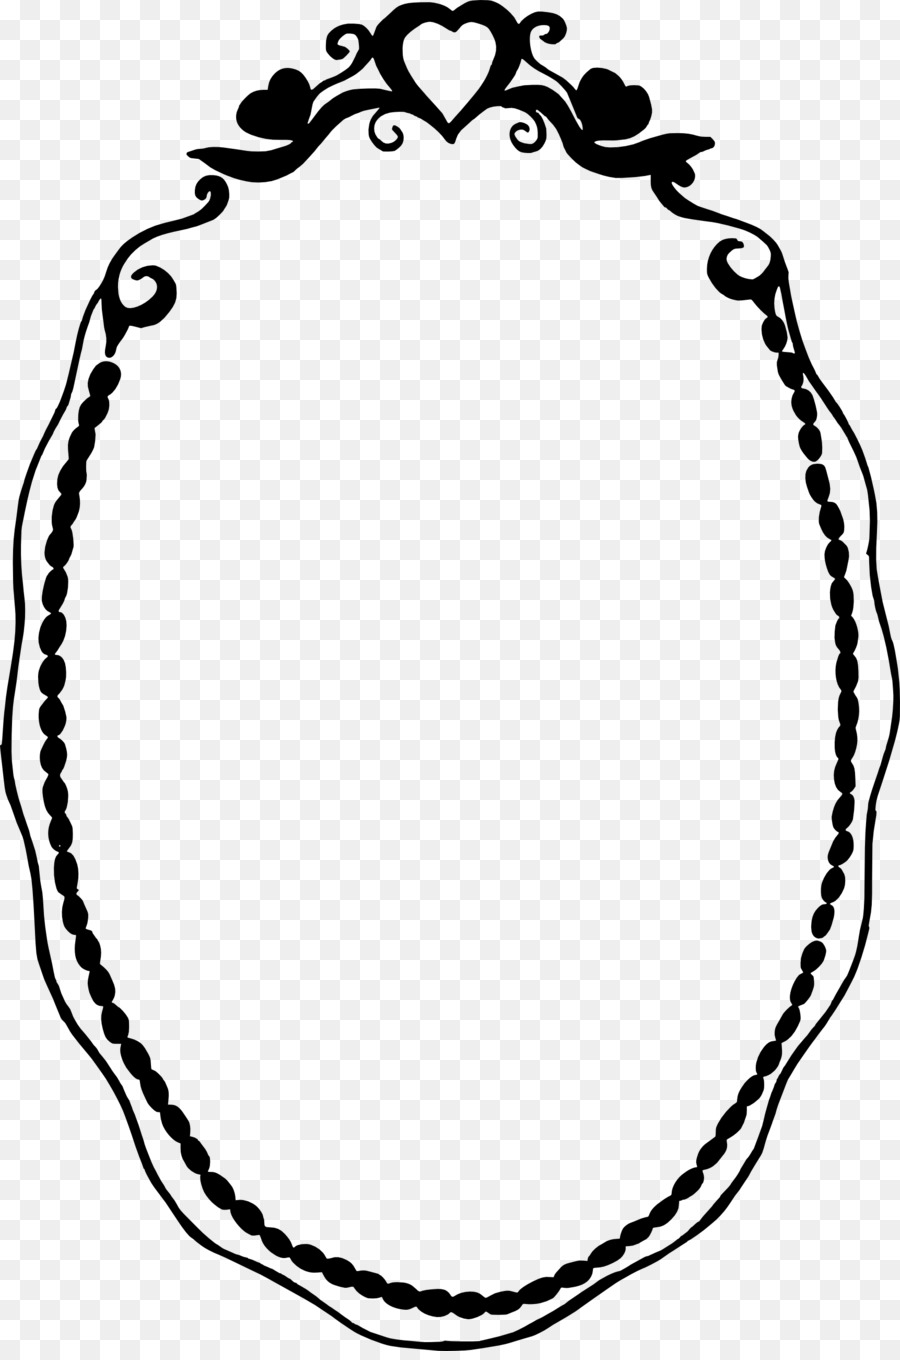 Drawing Oval Clip art - black frame png download - 1723*2587 - Free Transparent Drawing png Download.